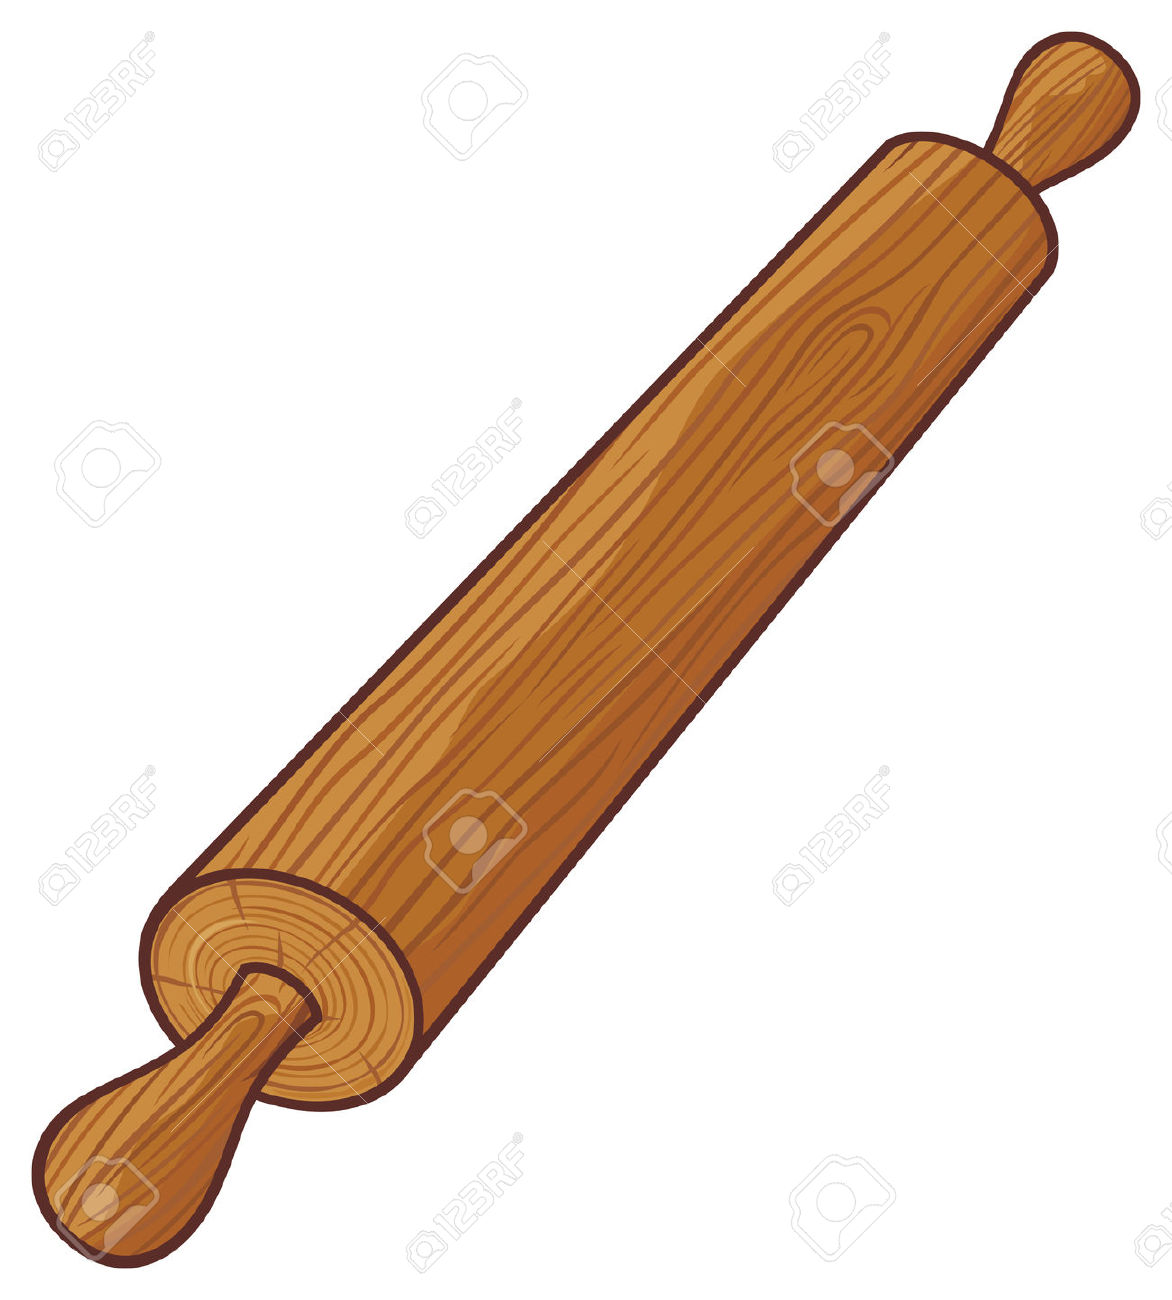 4,121 Rolling Pin Stock Vector Illustration And Royalty Free.